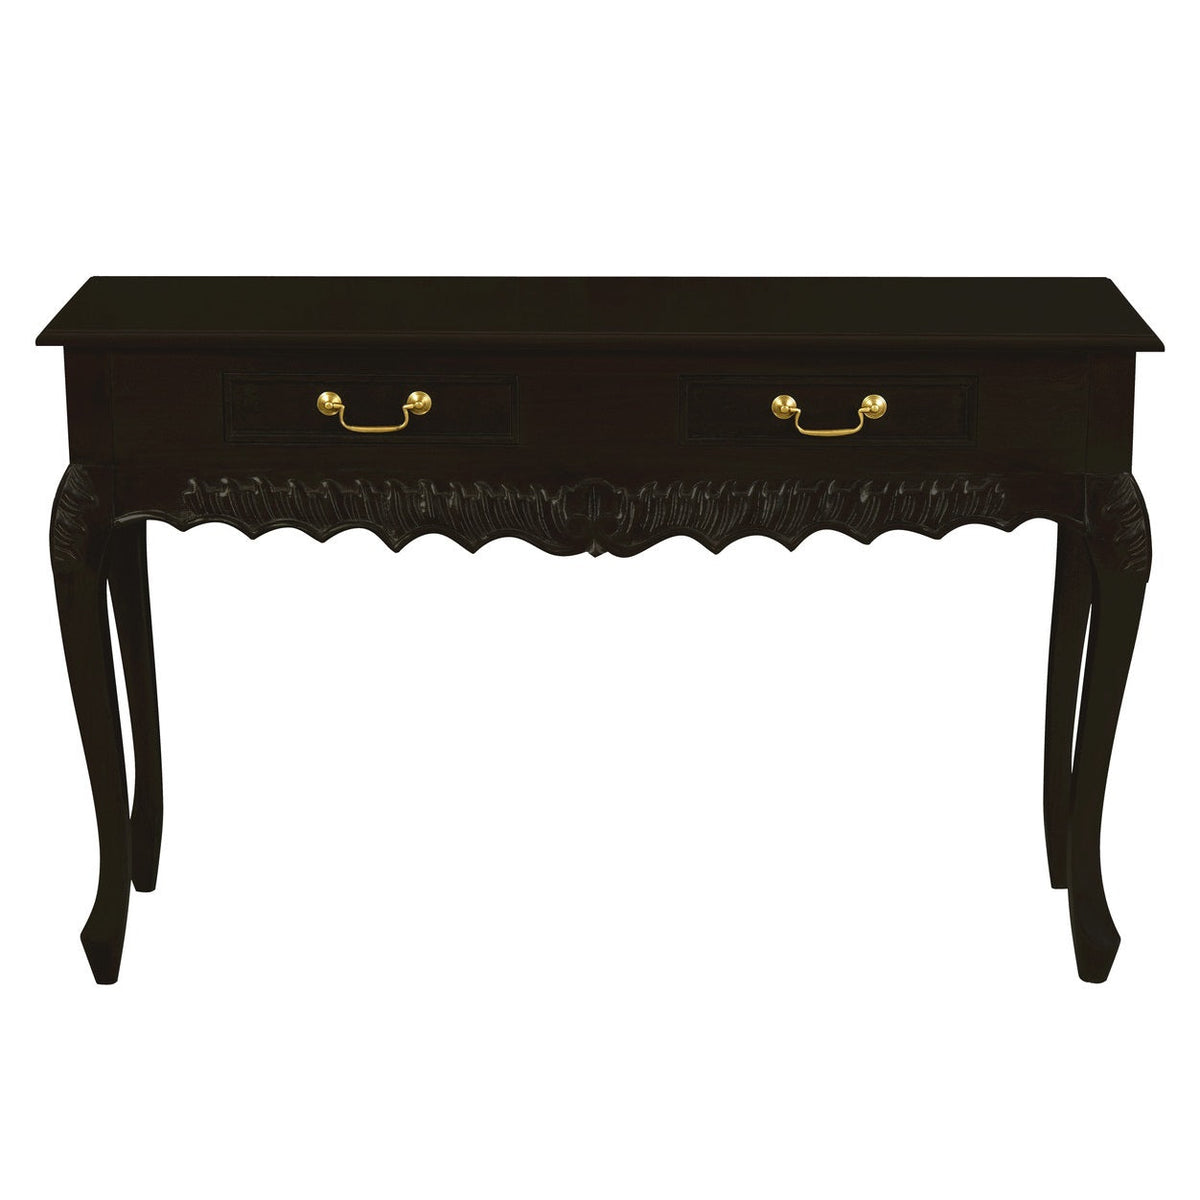 Seine Carved Sofa Table in Chocolate - 2 Drawer - Notbrand